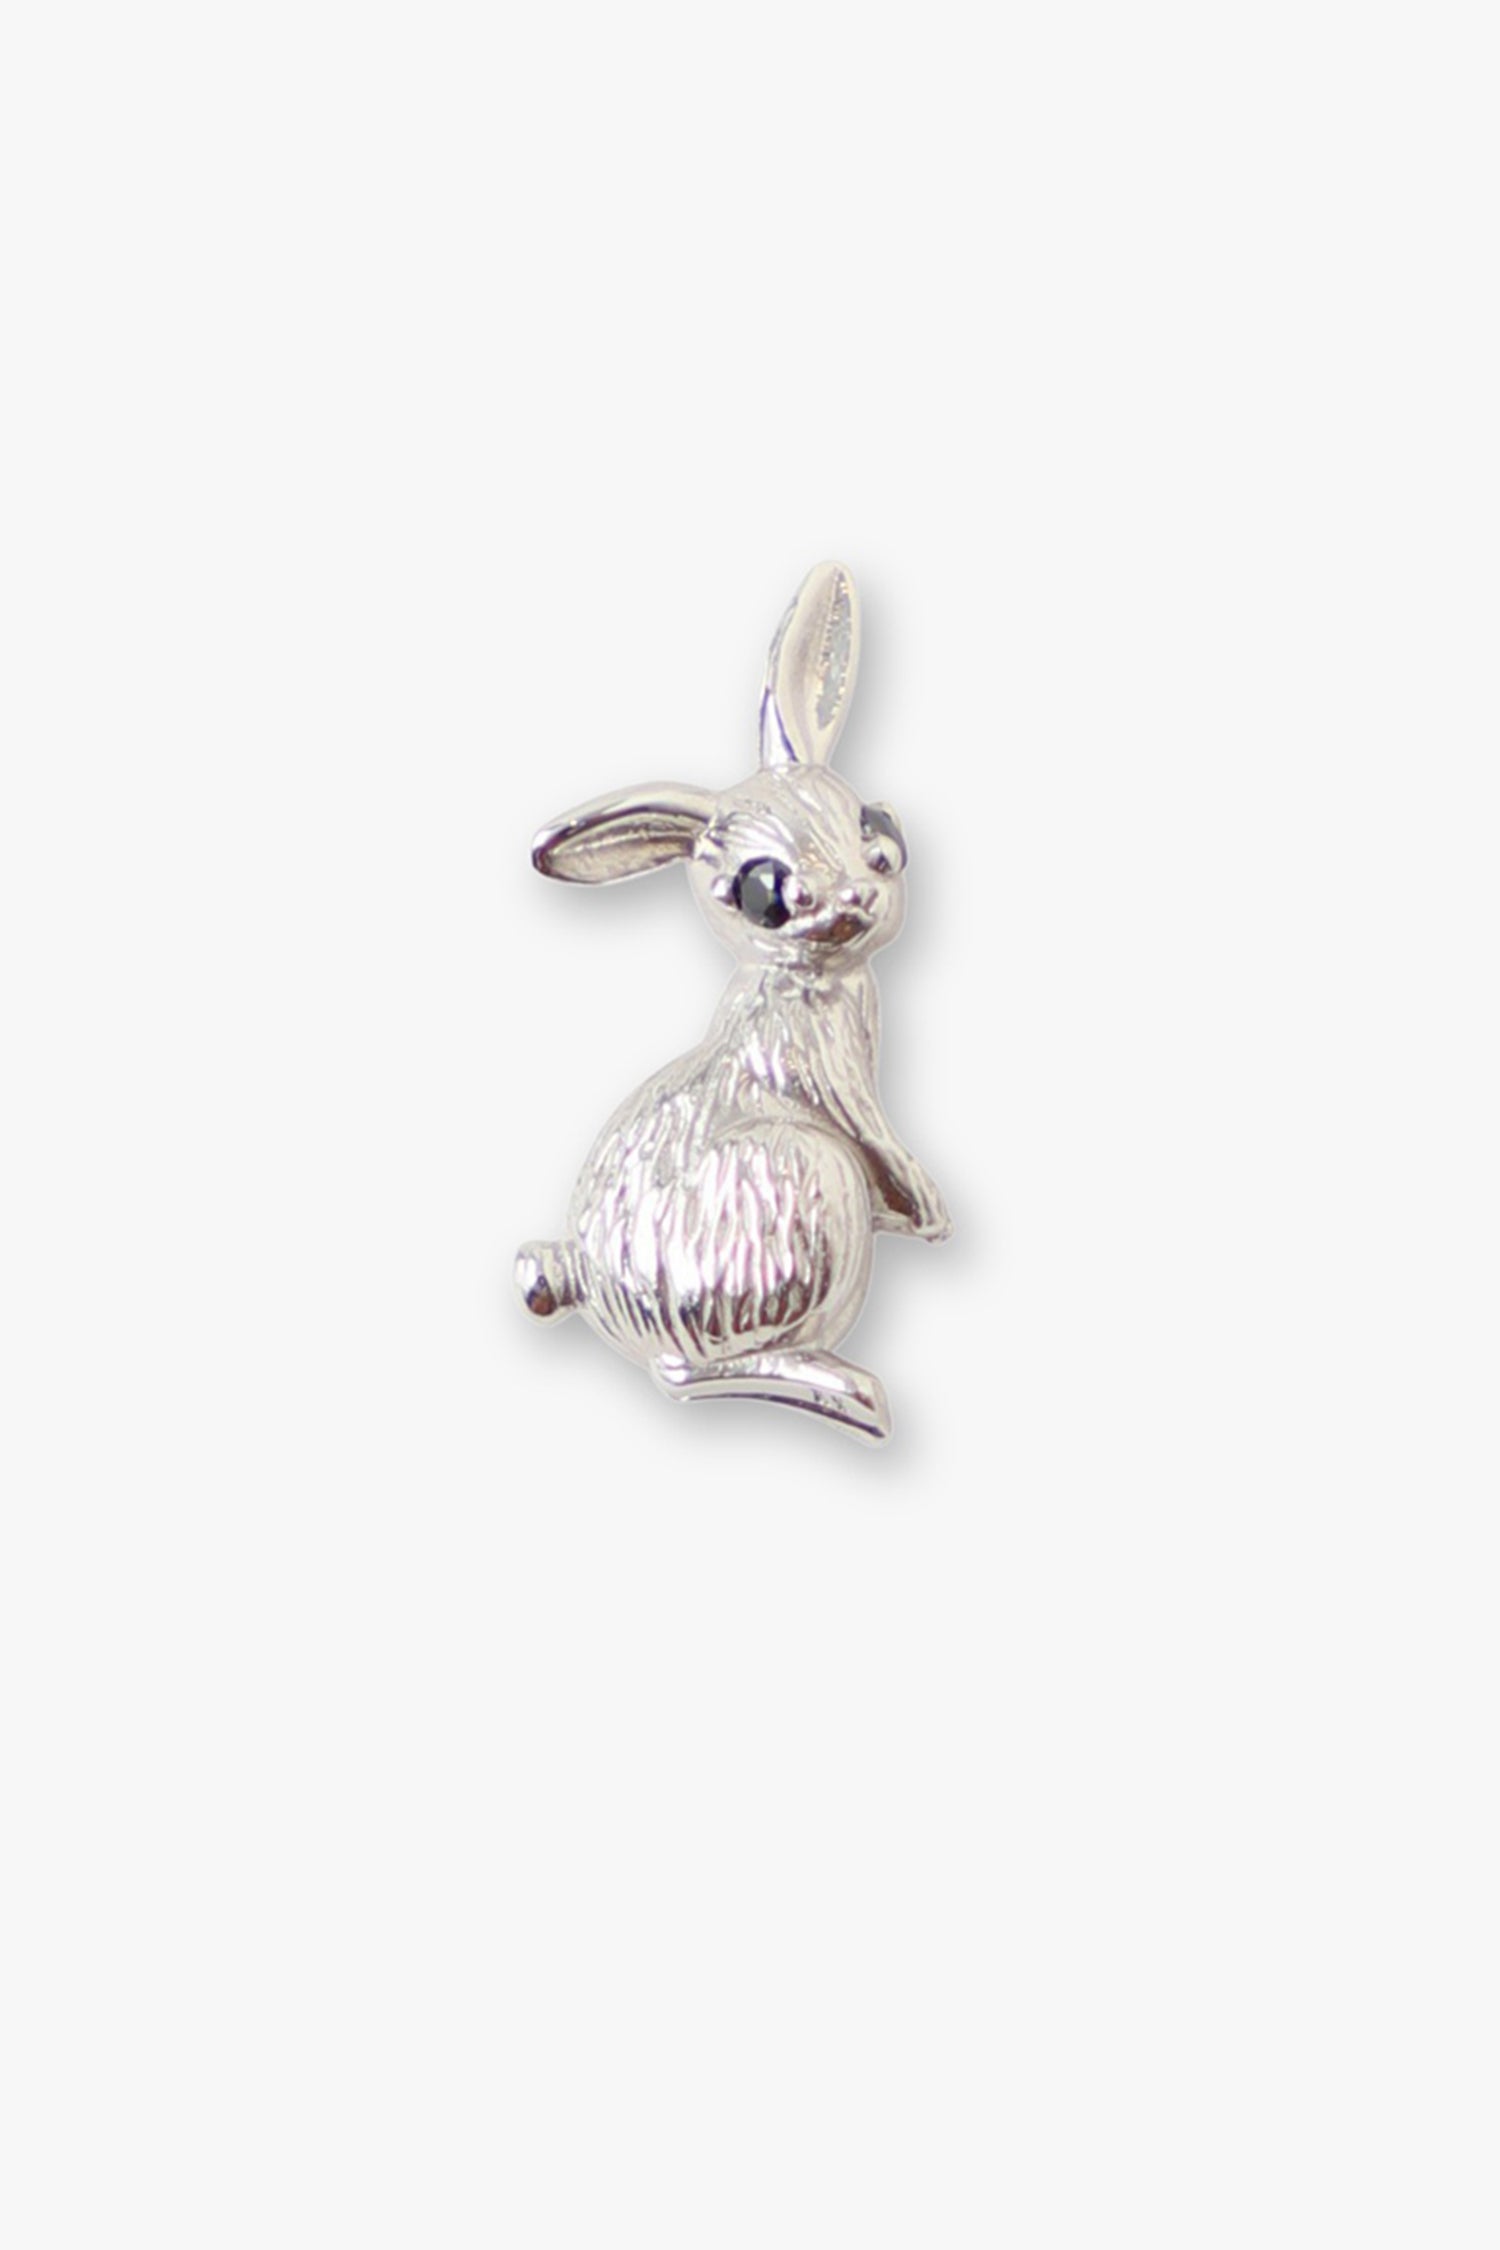  Bunny  Earrings rabbit in silver rhodium plated showing the dark eyes